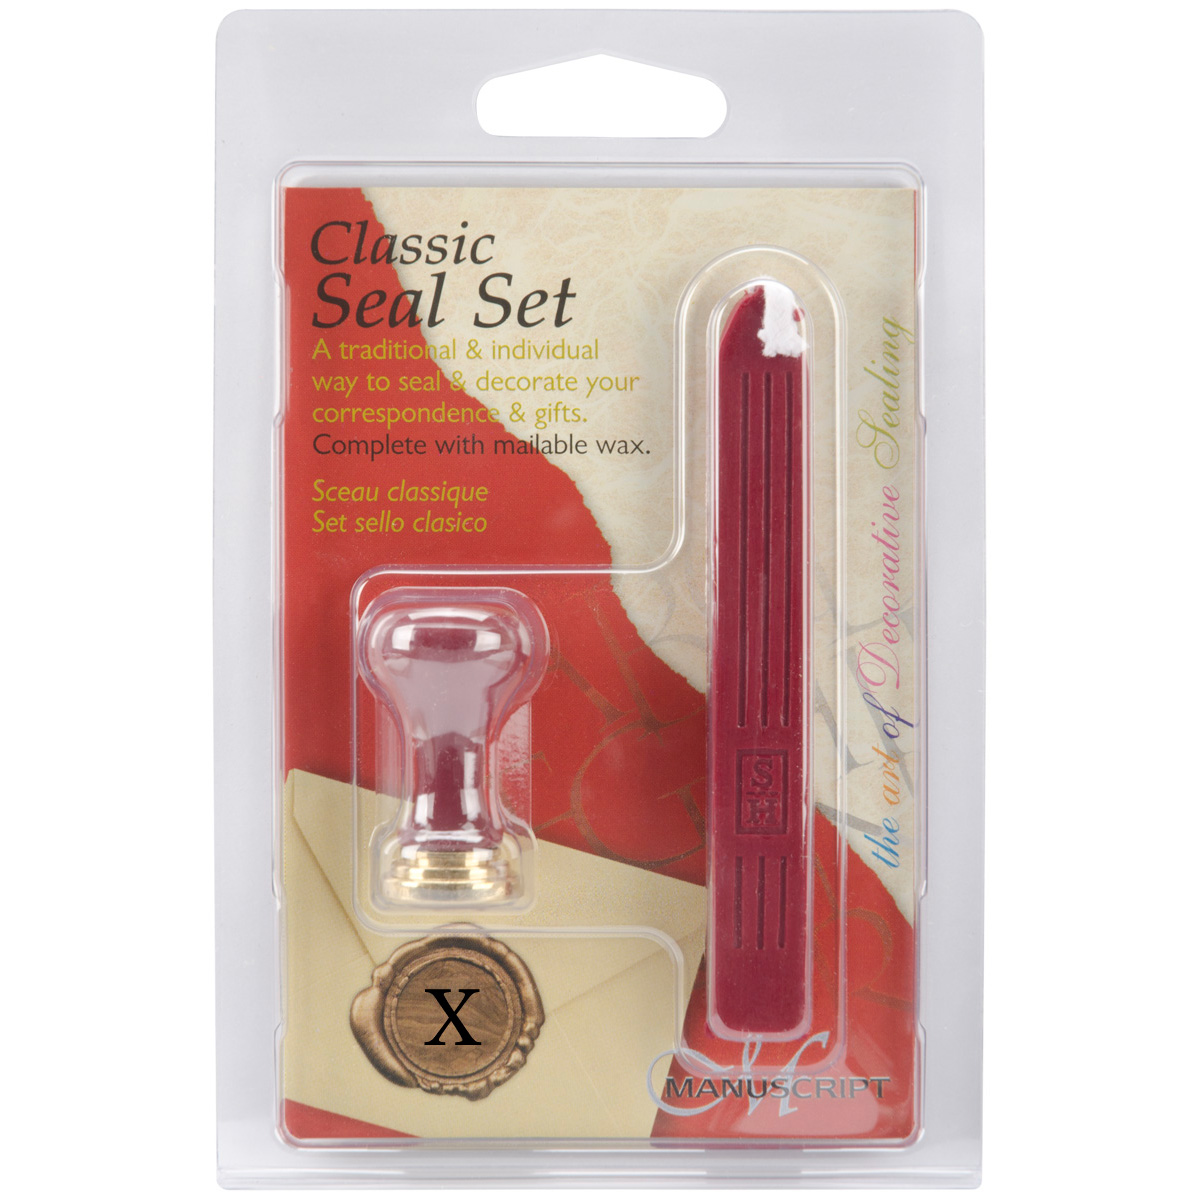 Msh725-x Classic Initial Sealing Set With Red Wax - X